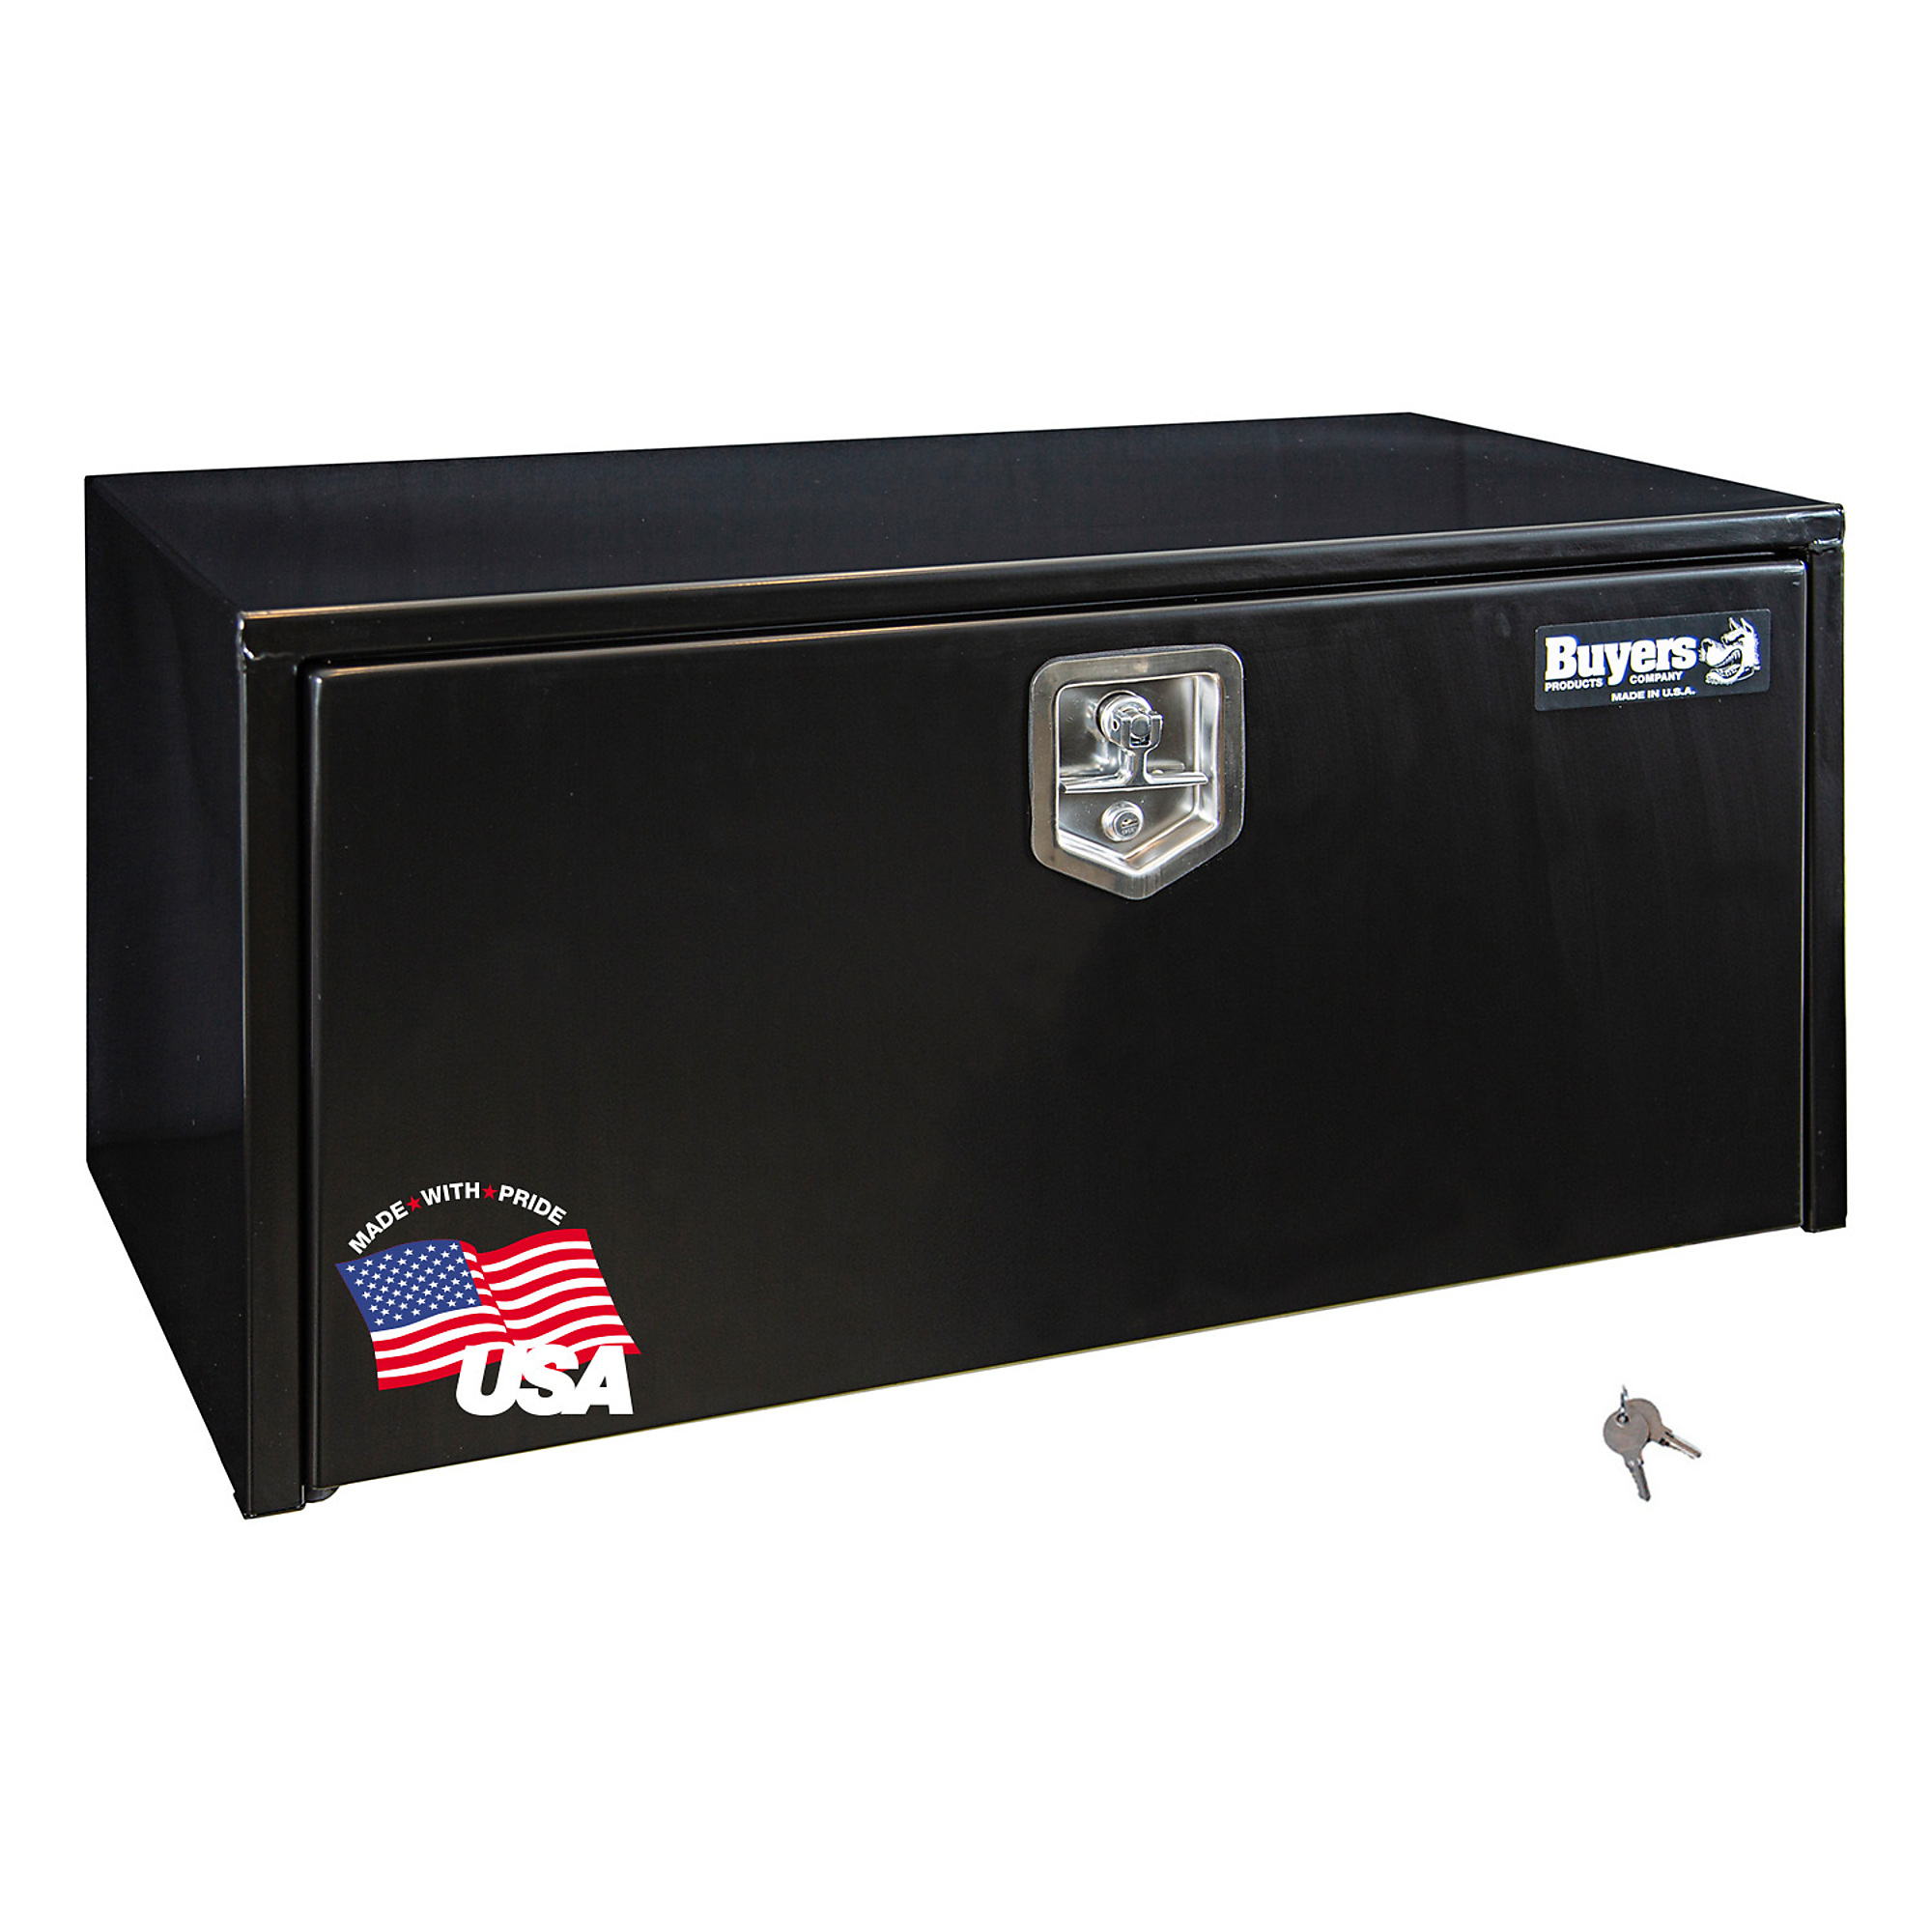 Buyers Products, Underbody Truck Box, Width 36 in, Material Carbon Steel, Color Finish Glossy Black, Model 1703326